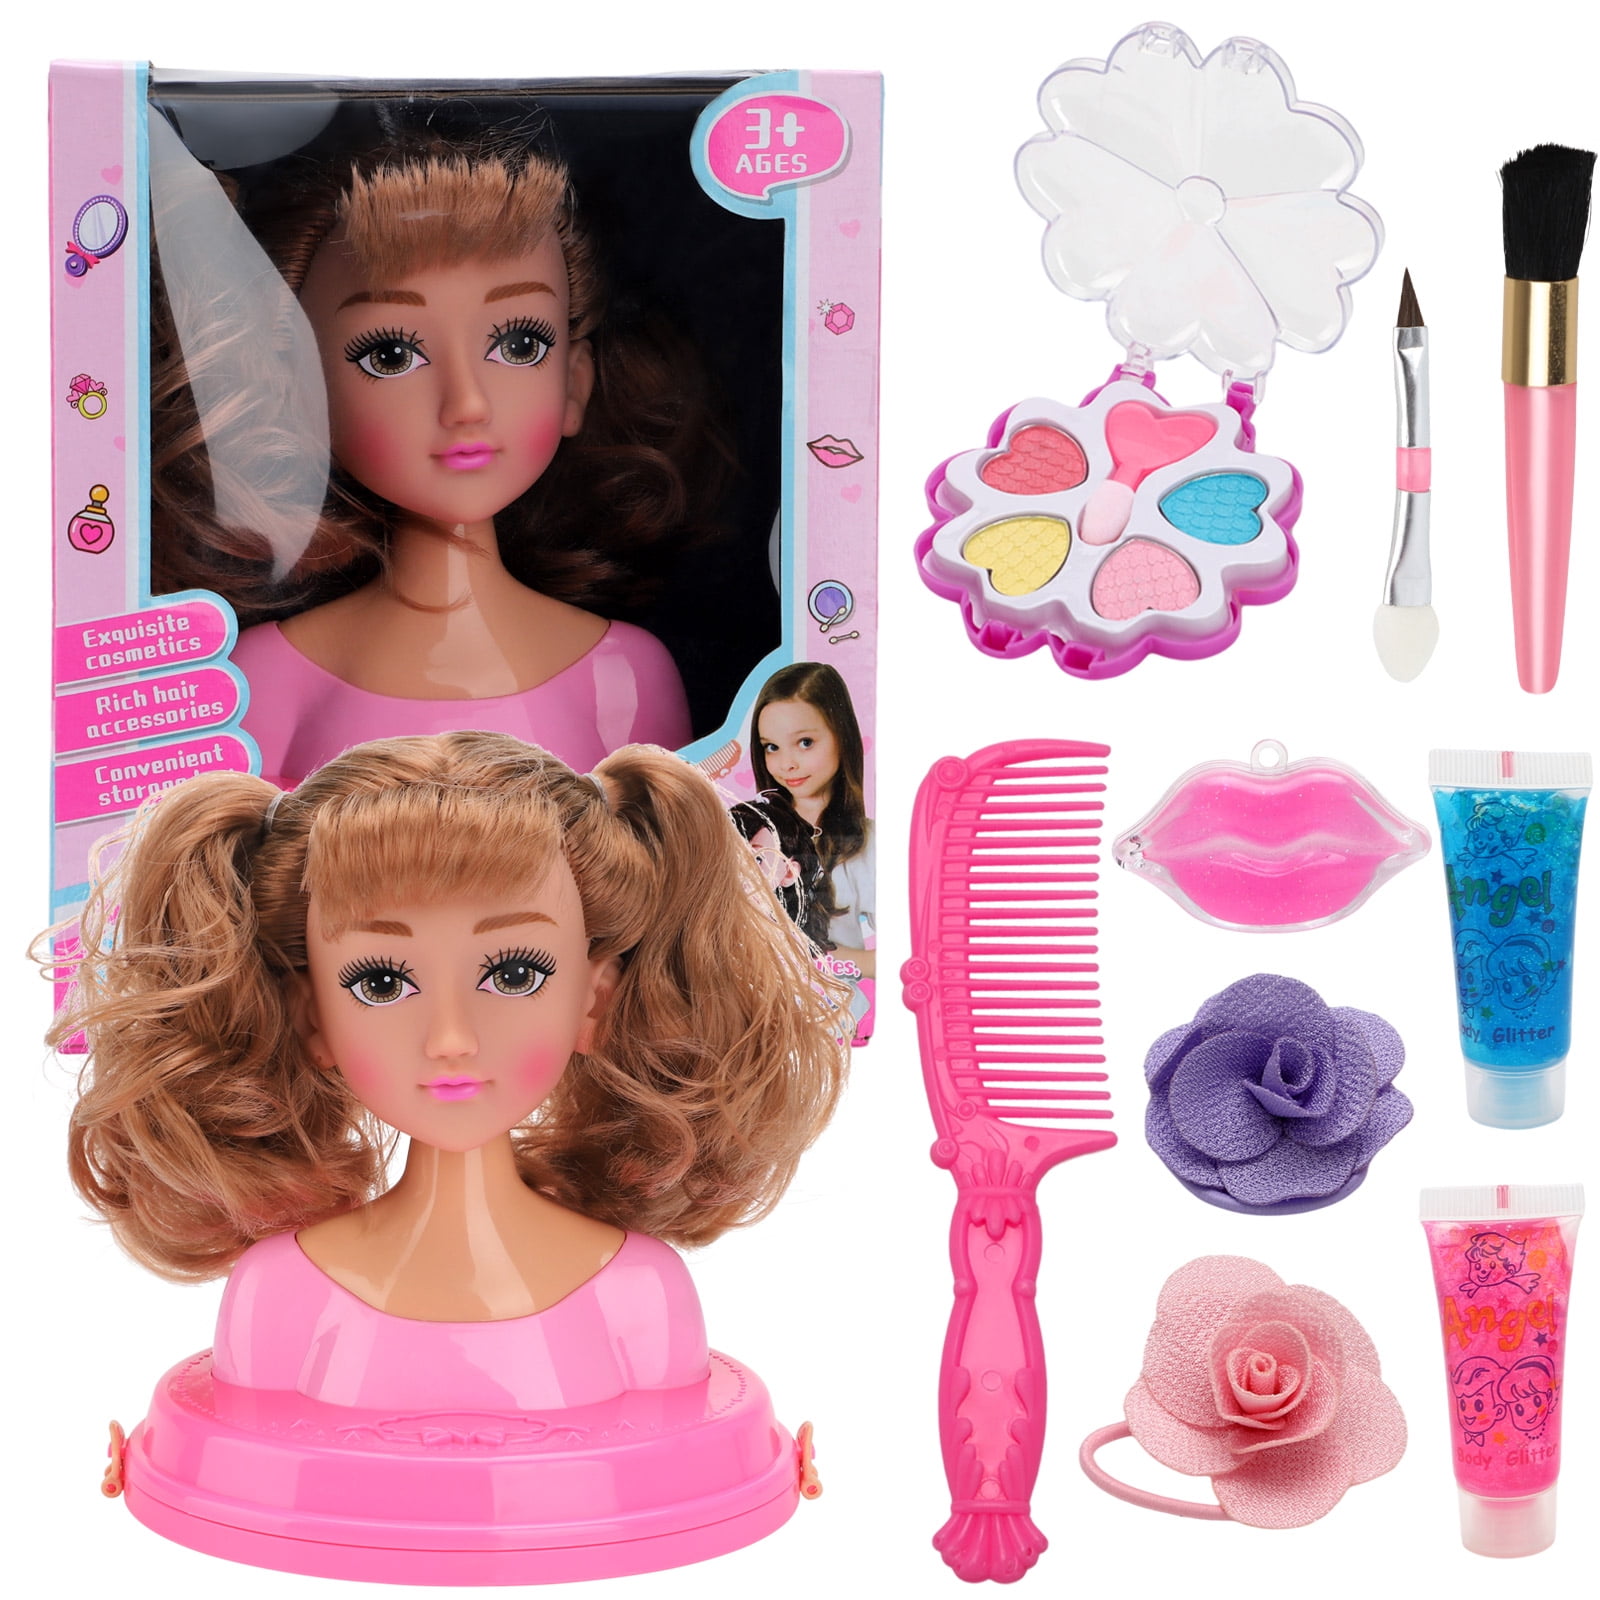 barbie styling head with makeup